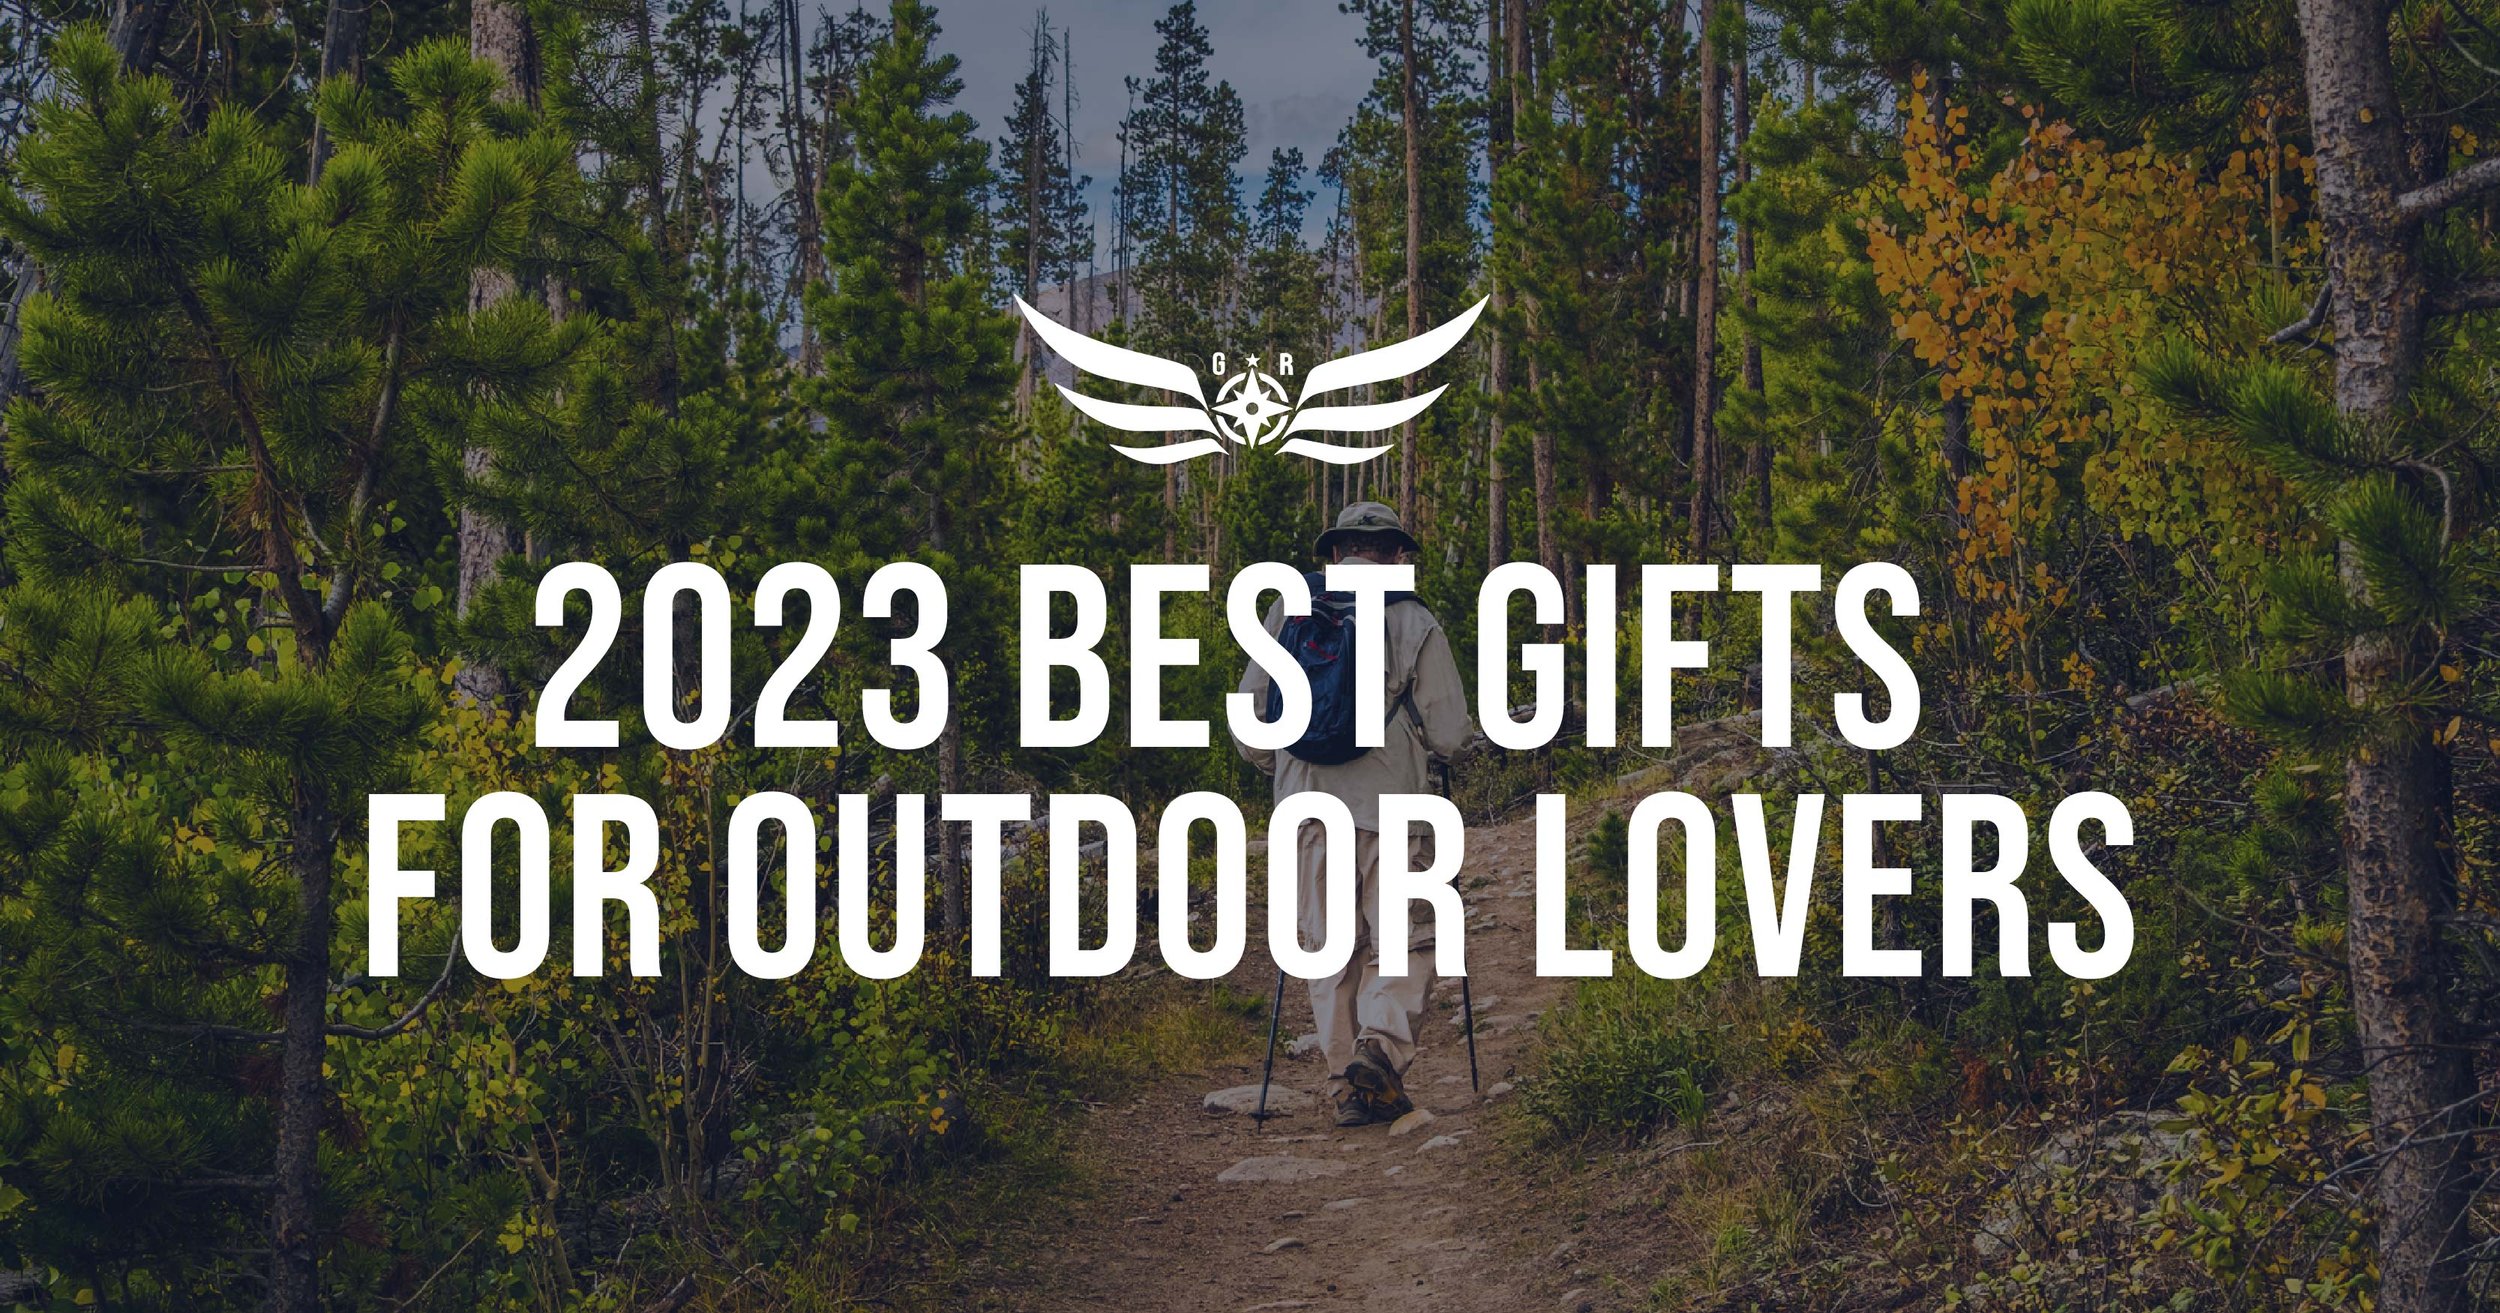 2023 Best Gifts for Outdoor Lovers